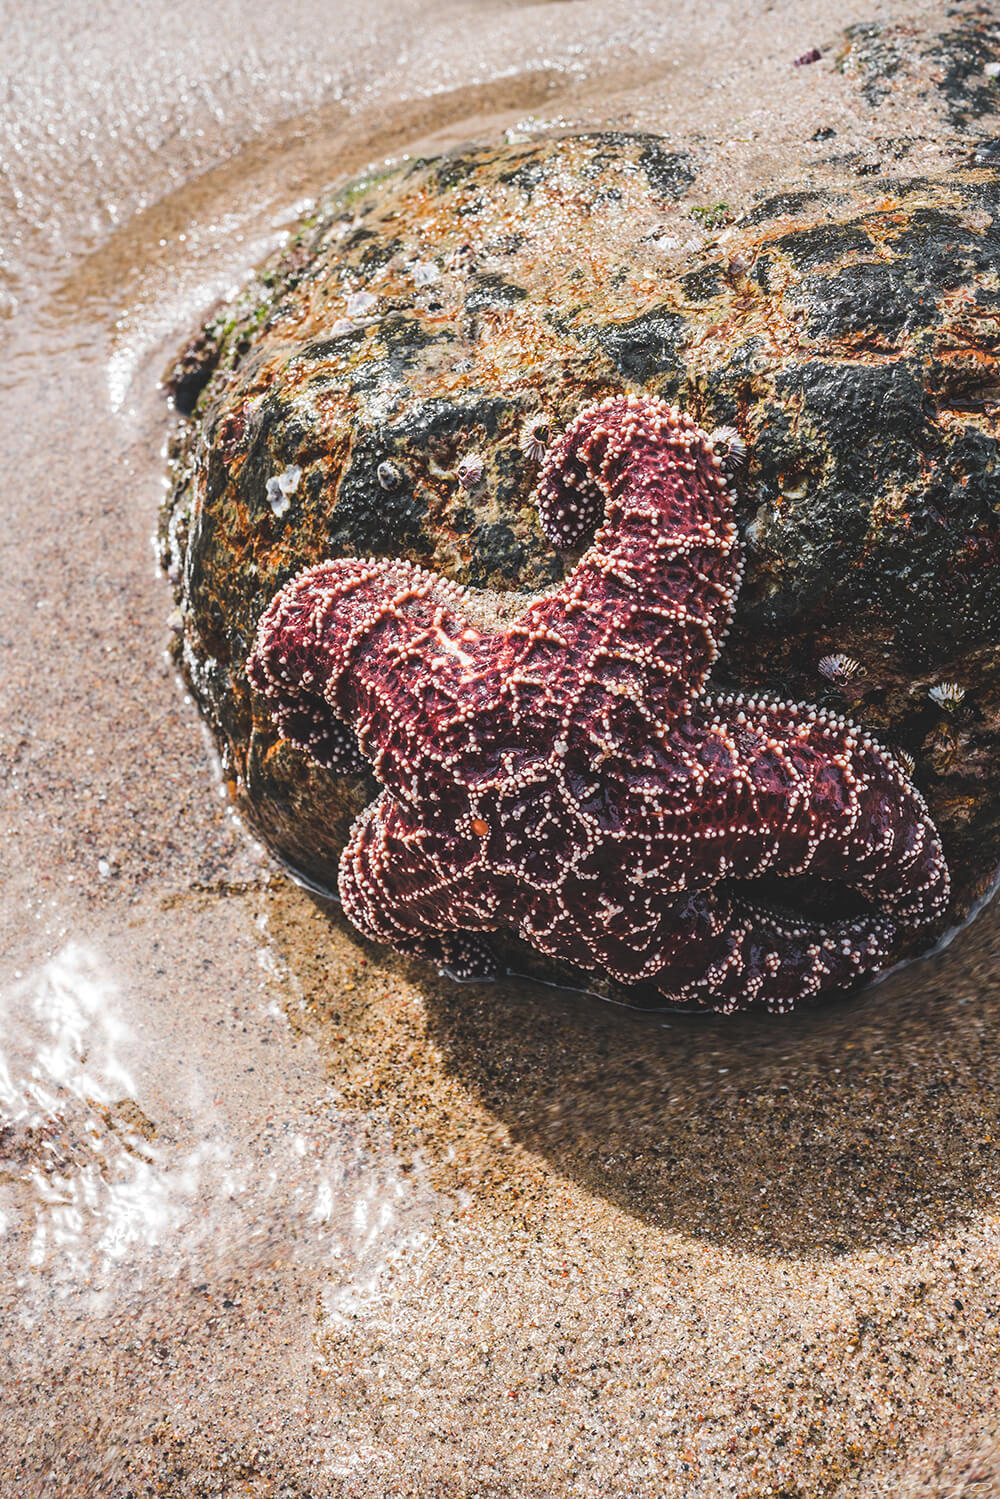 A large Pacific starfish attached to a rock in Malibu, CA